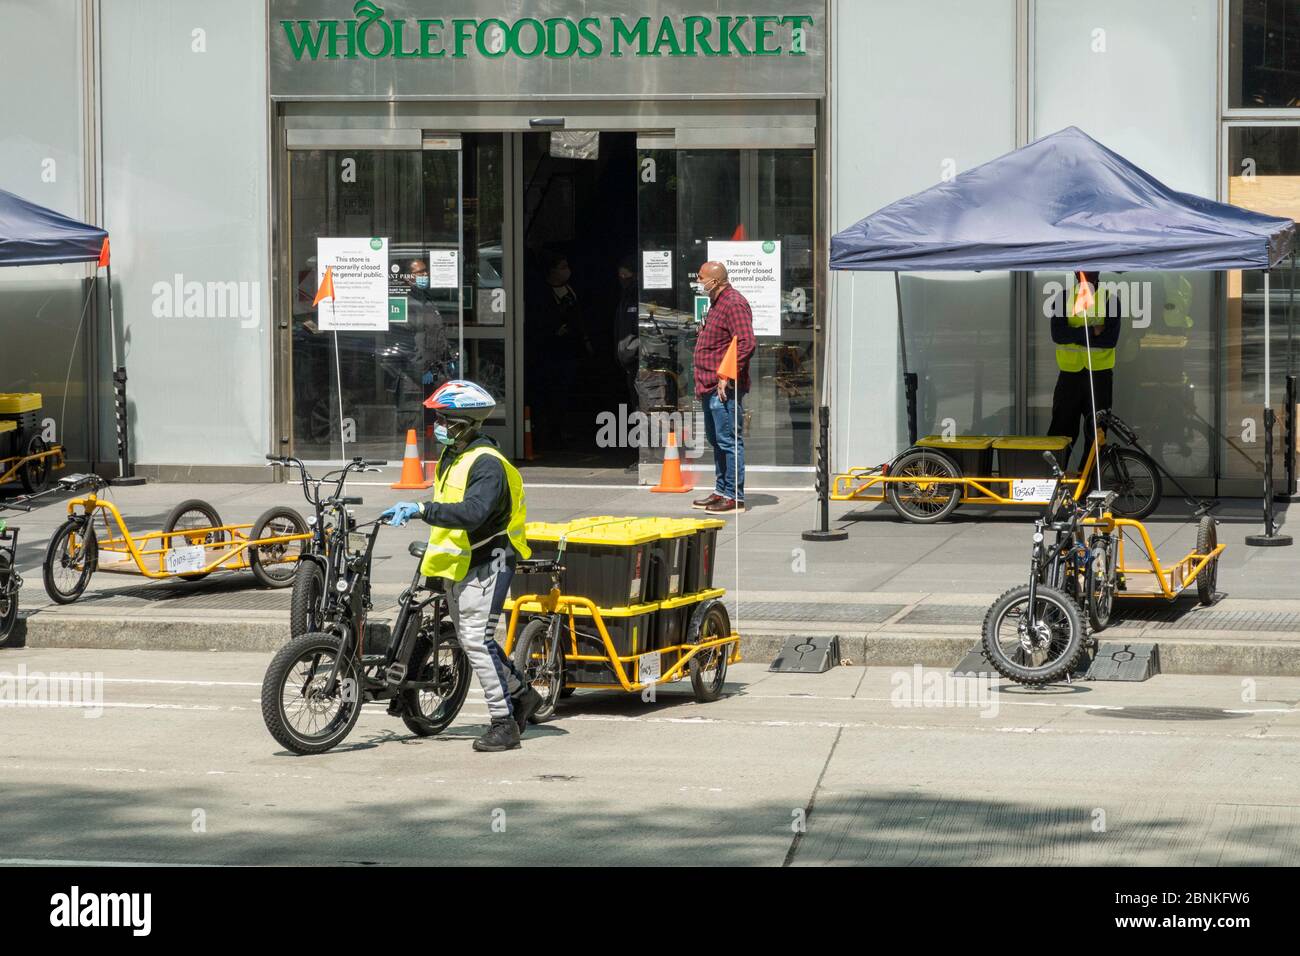 Whole Foods Market employs Carla Cargo trailer with e-bike for food delivery in Midtown Manhattan during the COVID-19 pandemic, New York City, USA Stock Photo